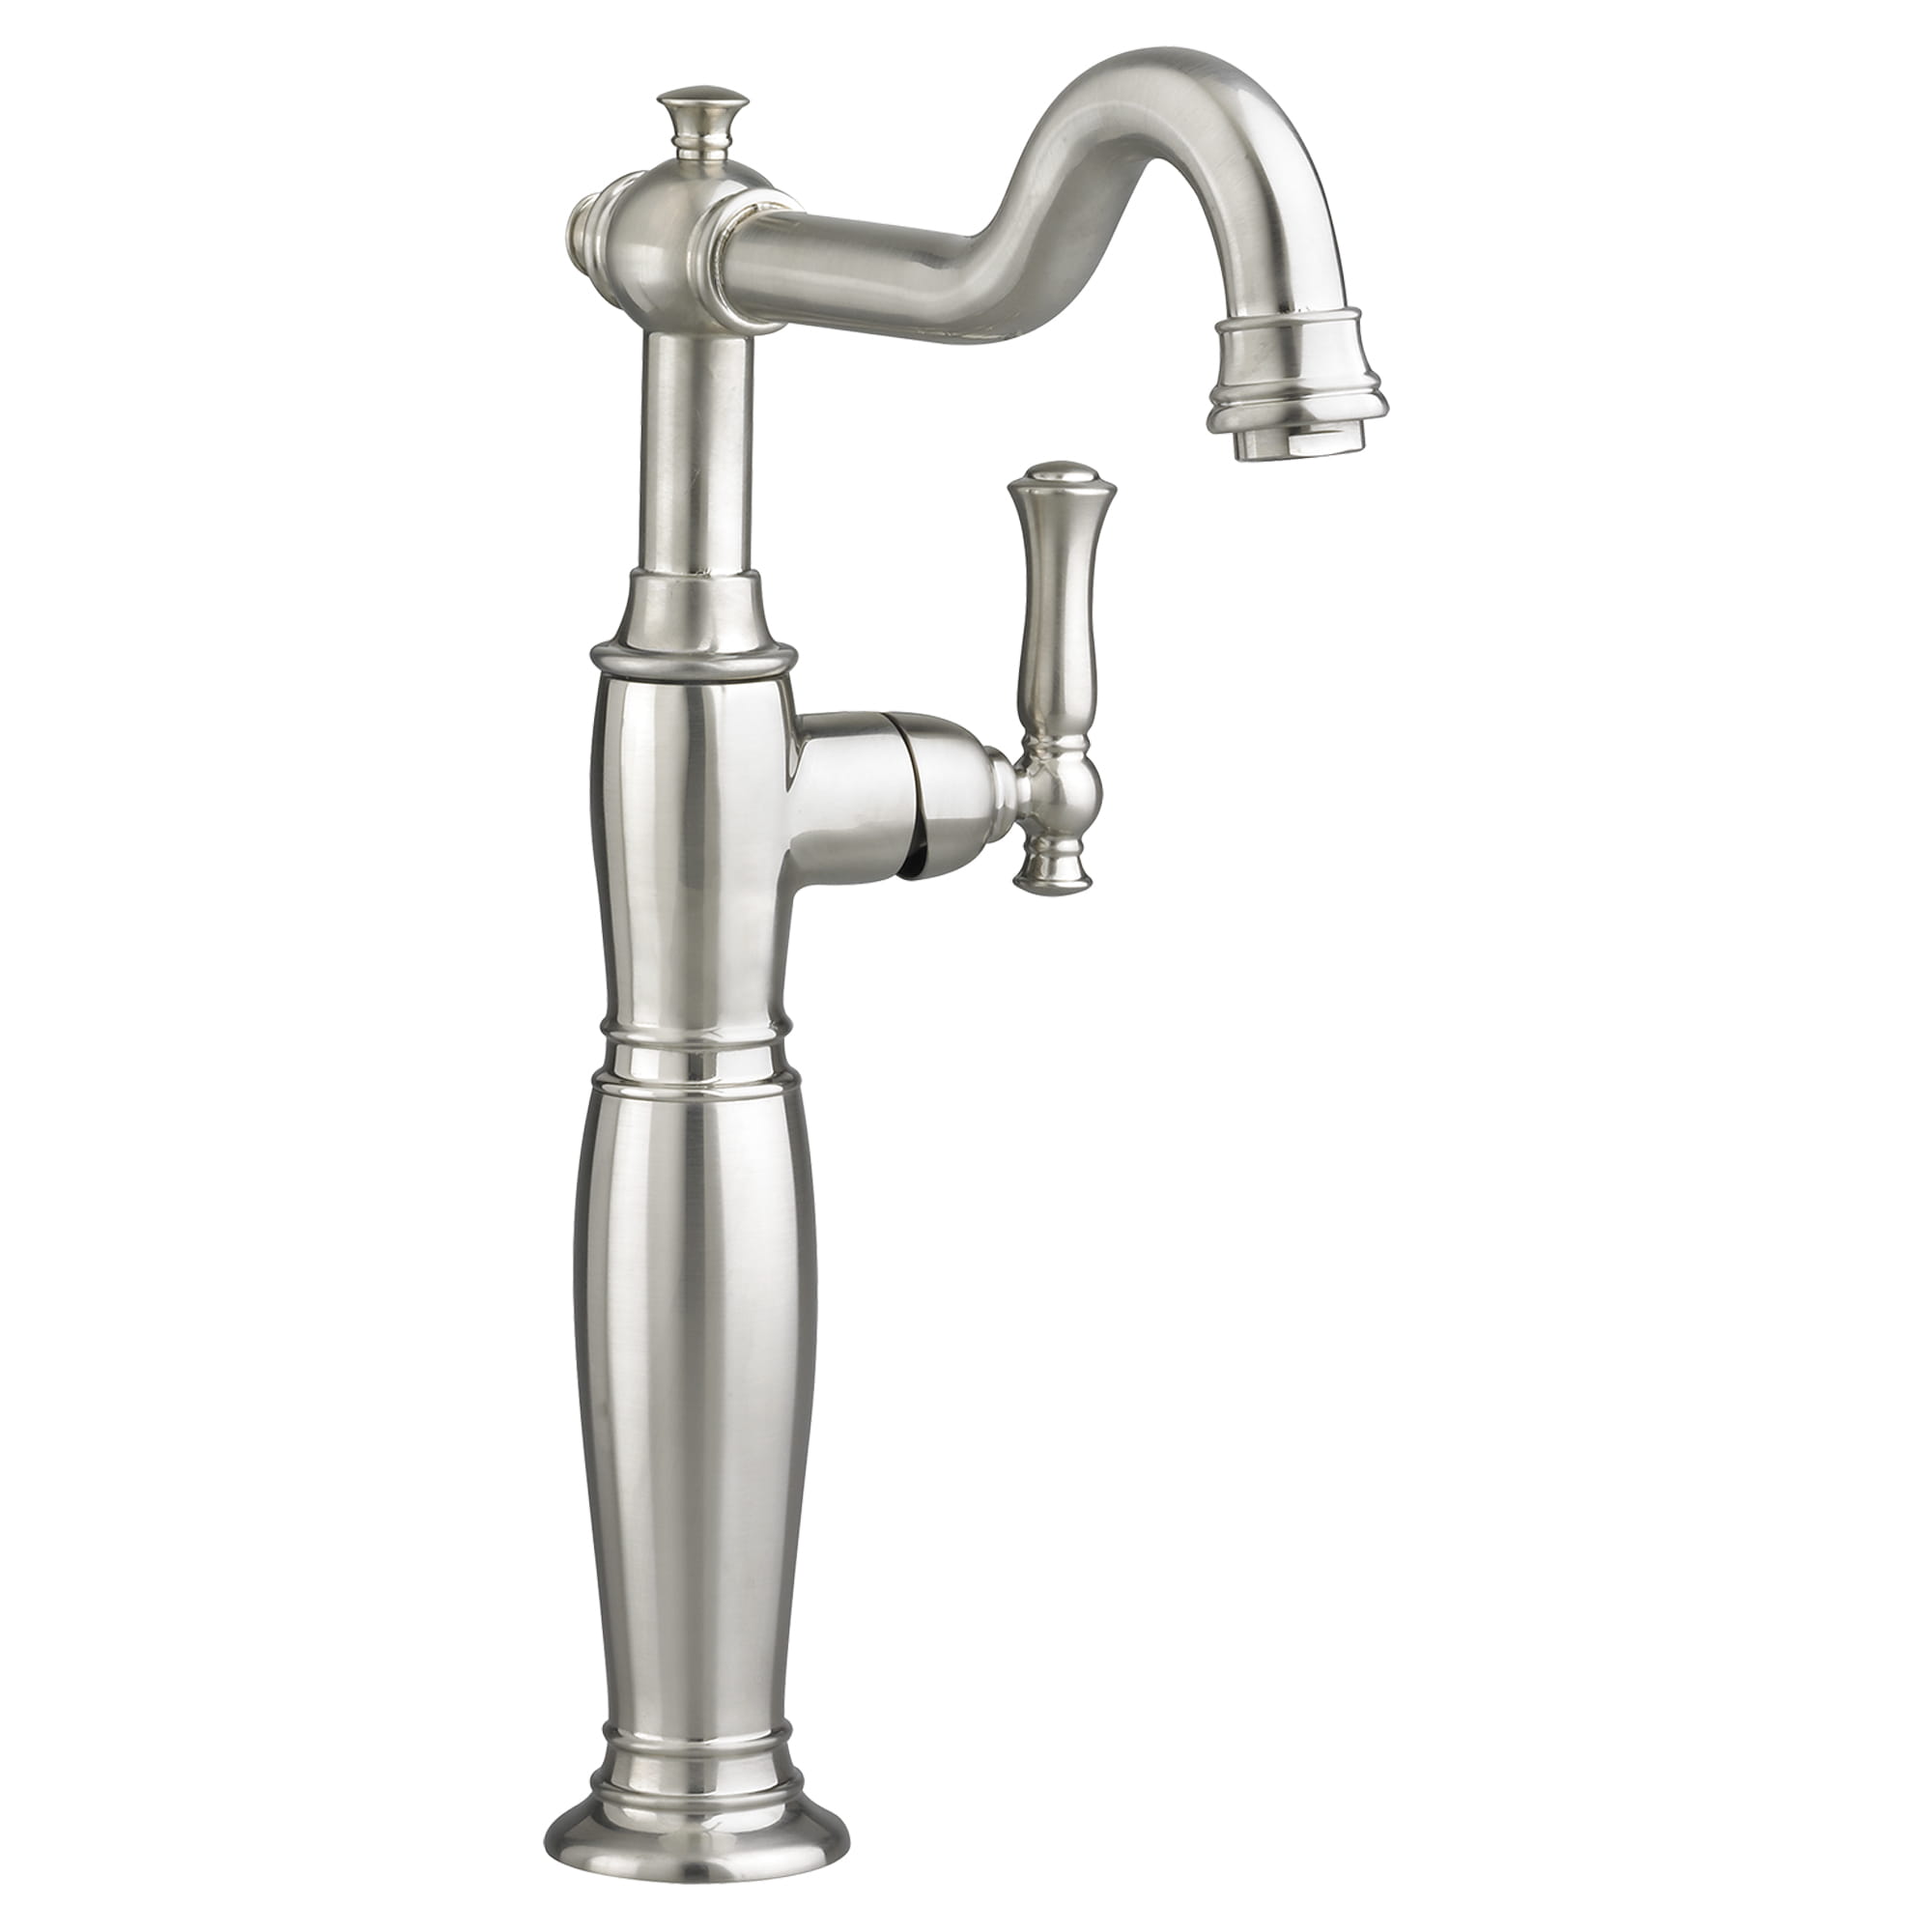 Quentin Single Hole Single Handle FeatureVessel Sink Faucet With Lever Handle   BRUSHED NICKEL